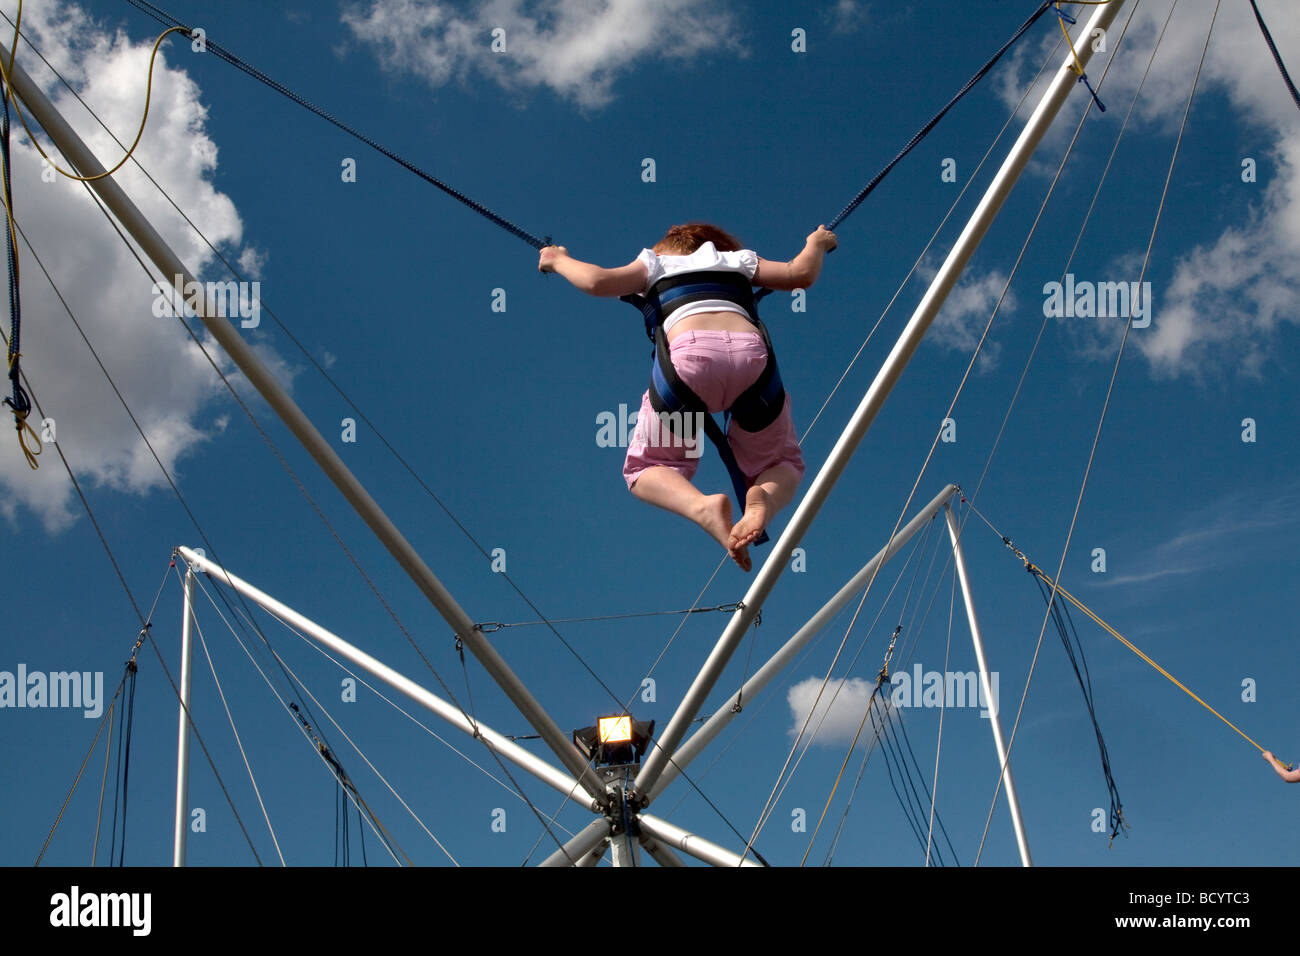 A red haired girl enjoys a trampoline ride under blue skies at the 5th Colchester Military Festival in Colchester, Essex, UK Stock Photo